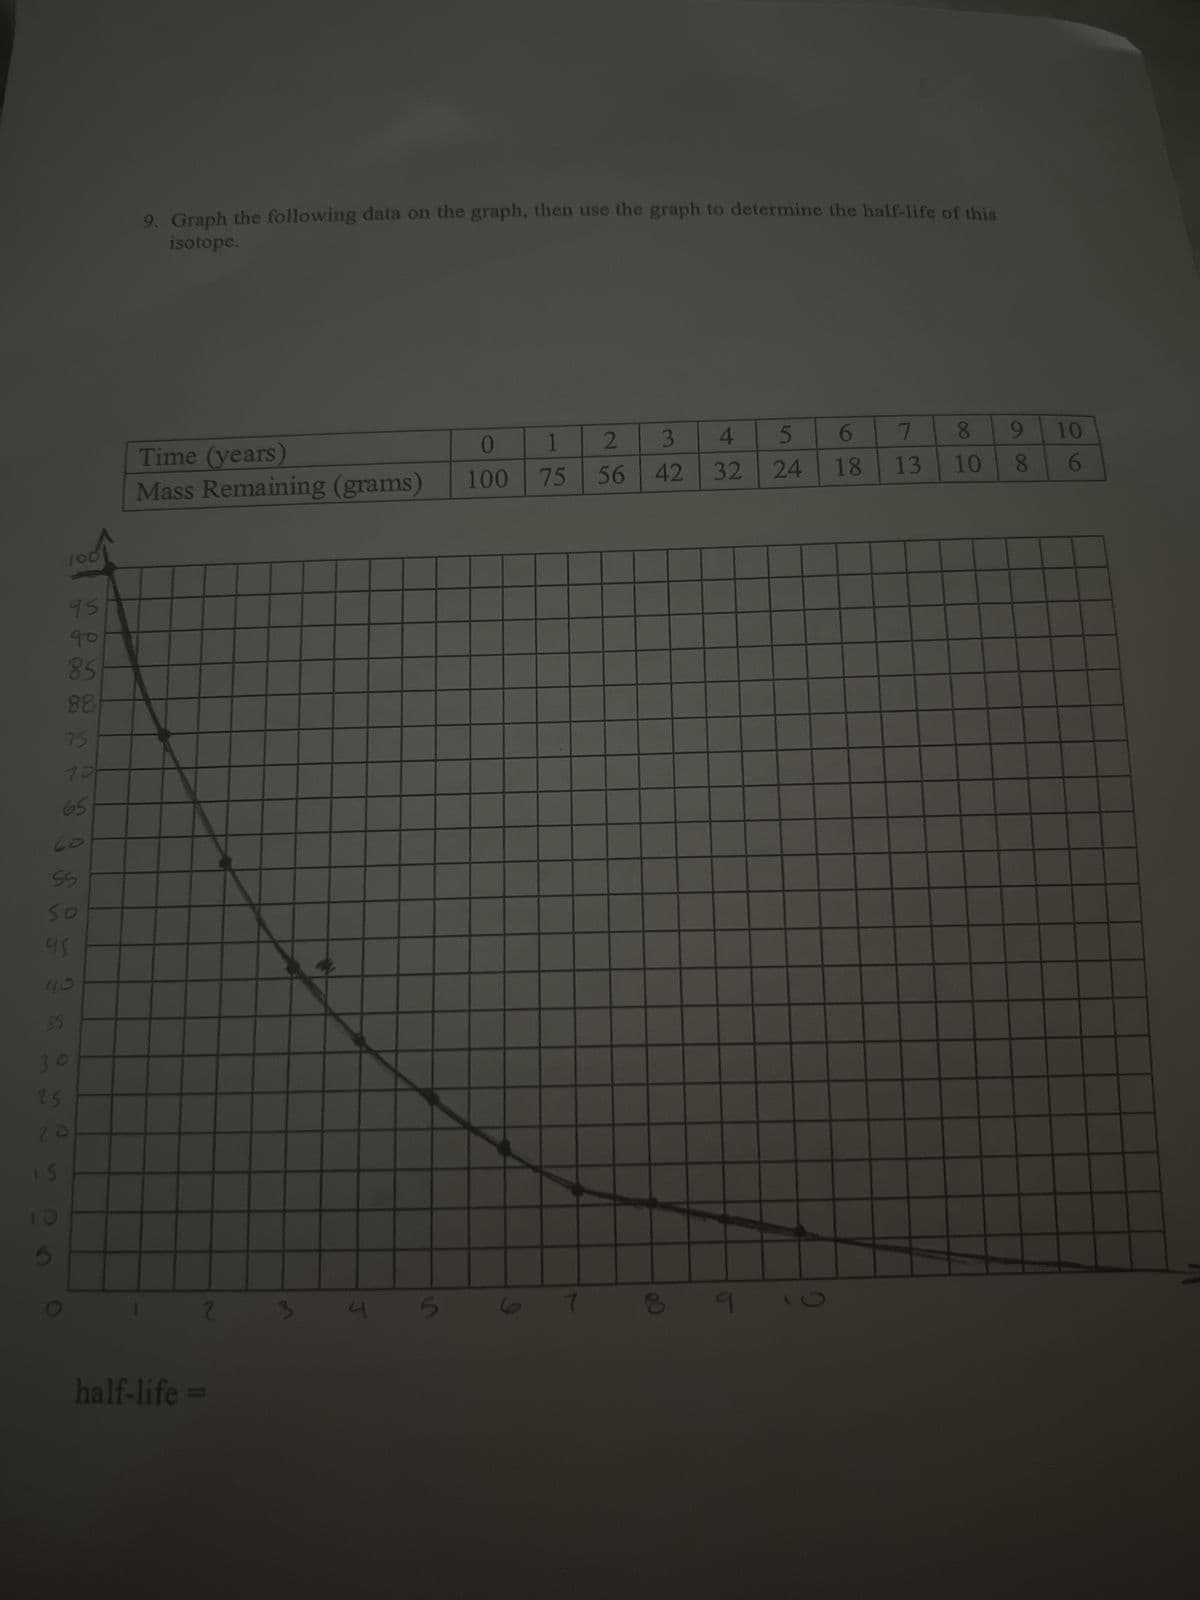 95
90
85
88
75
70
65
63
55
50
45
410
55
30
25
20
9. Graph the following data on the graph, then use the graph to determine the half-life of this
isotope.
Time (years)
0
1
2
3
4
5
เก
6
7
8
9
10
Mass Remaining (grams)
100
75
56
42
32
24
18
13
10
8
6
half-life =>
2
3
4 5